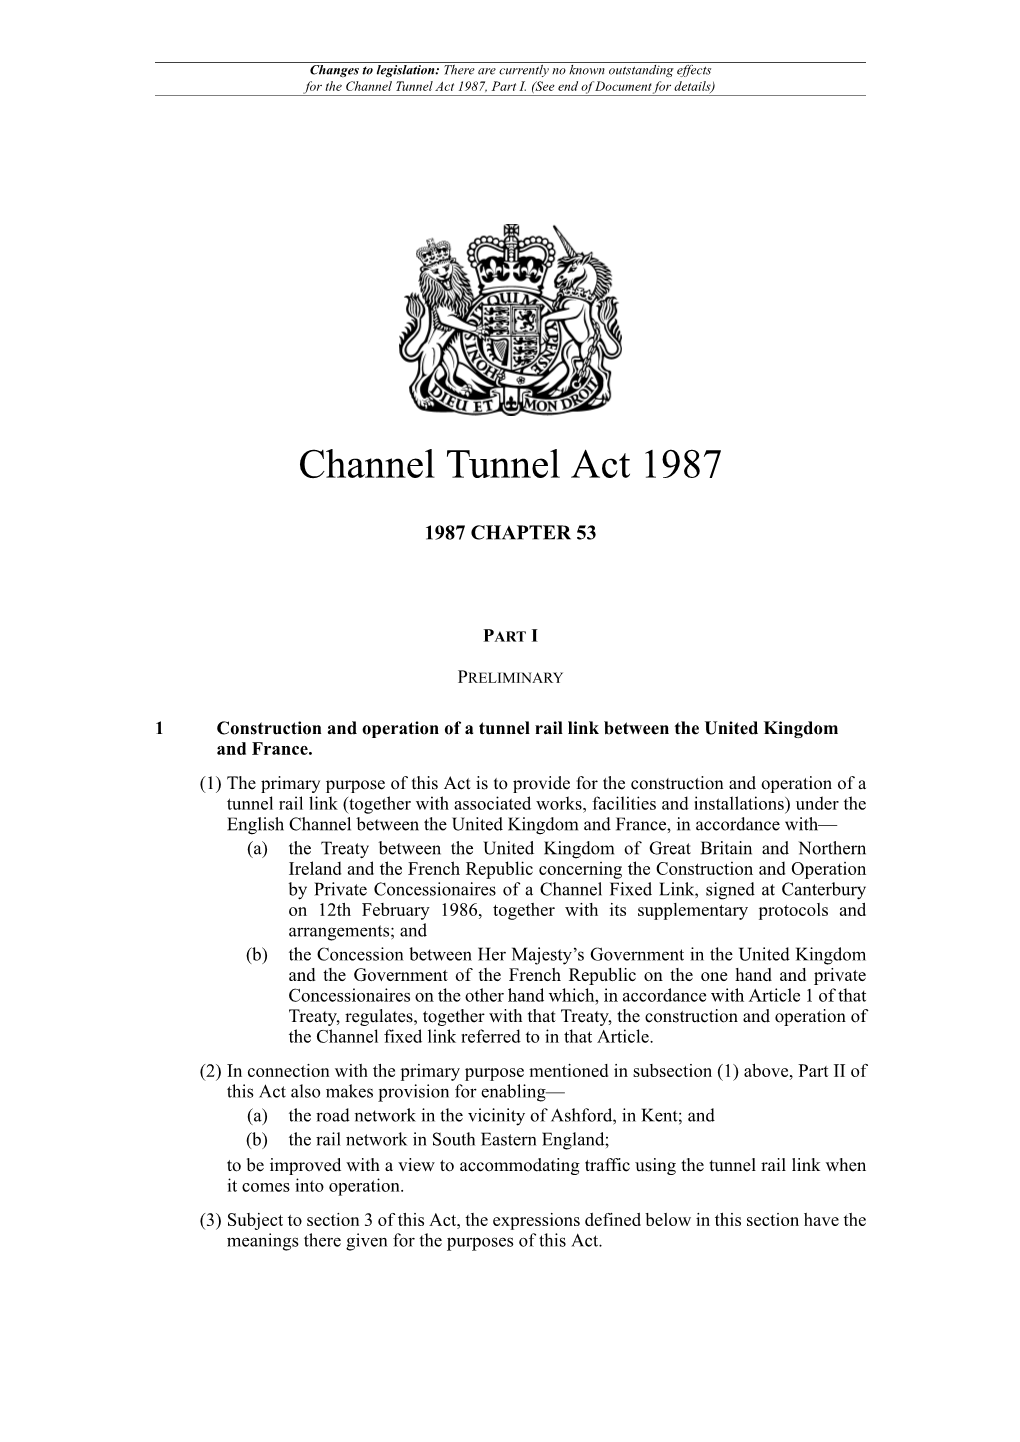 Channel Tunnel Act 1987, Part I